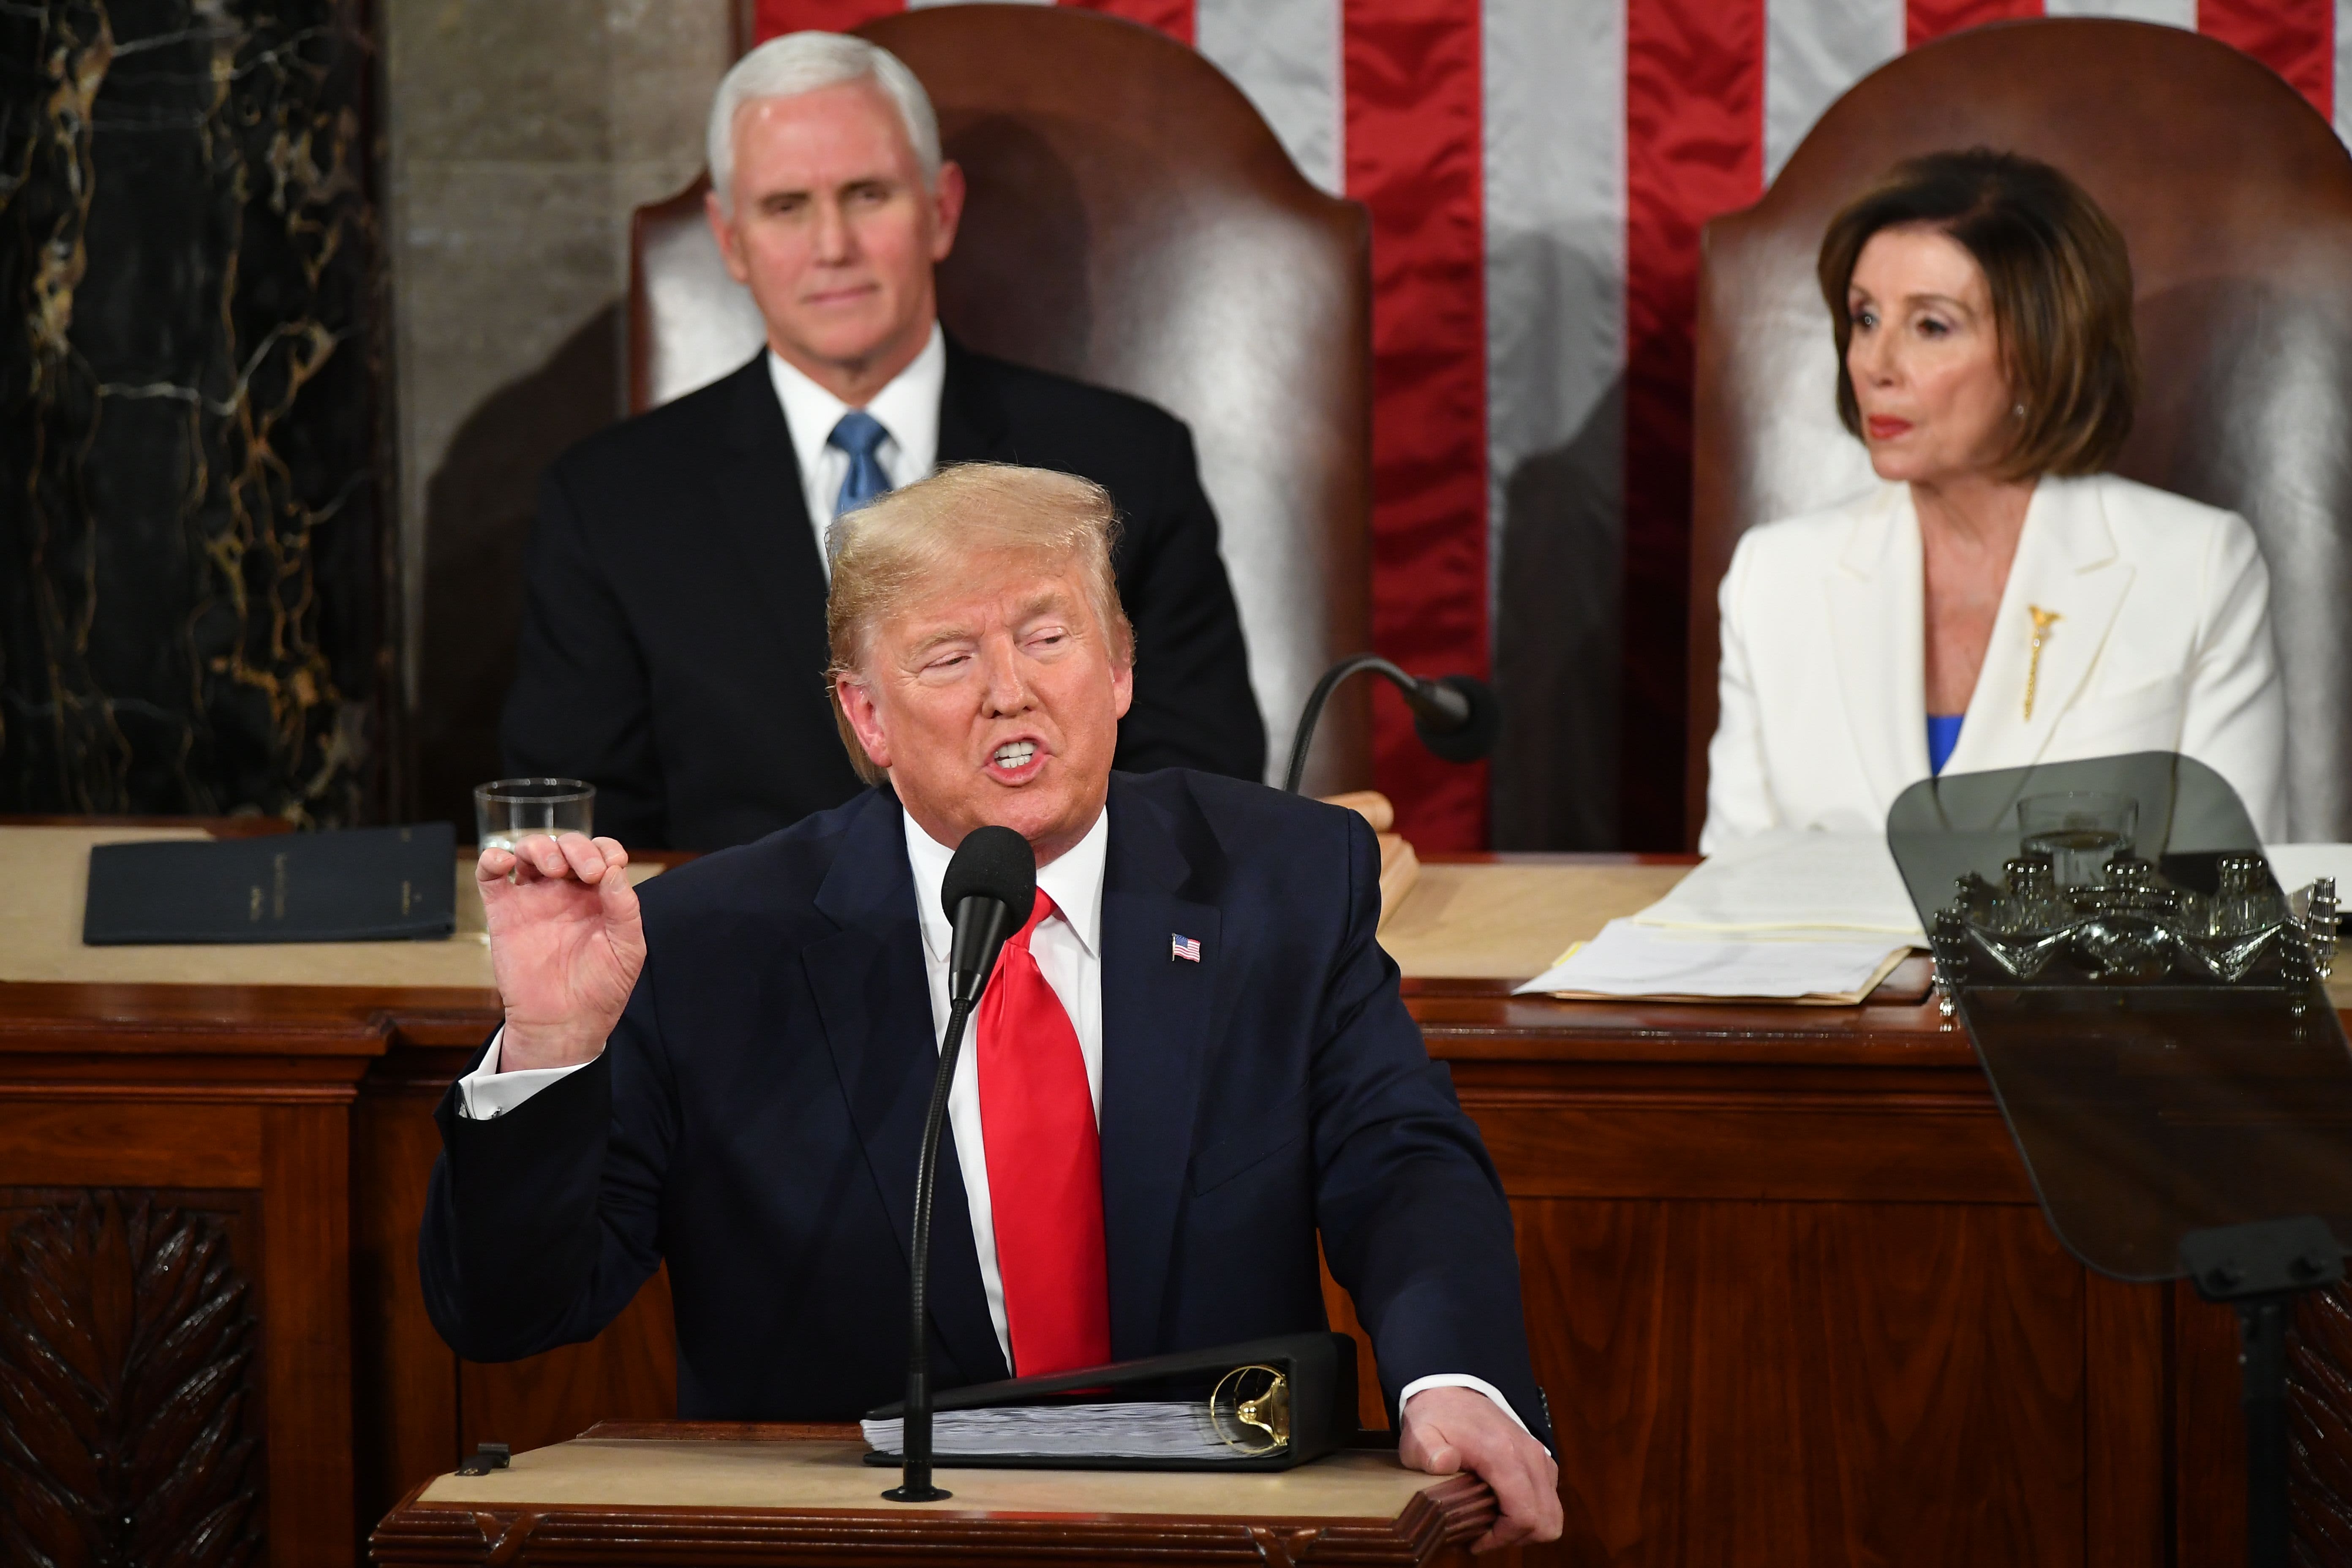 Watch the key moments from Trump's State of the Union address